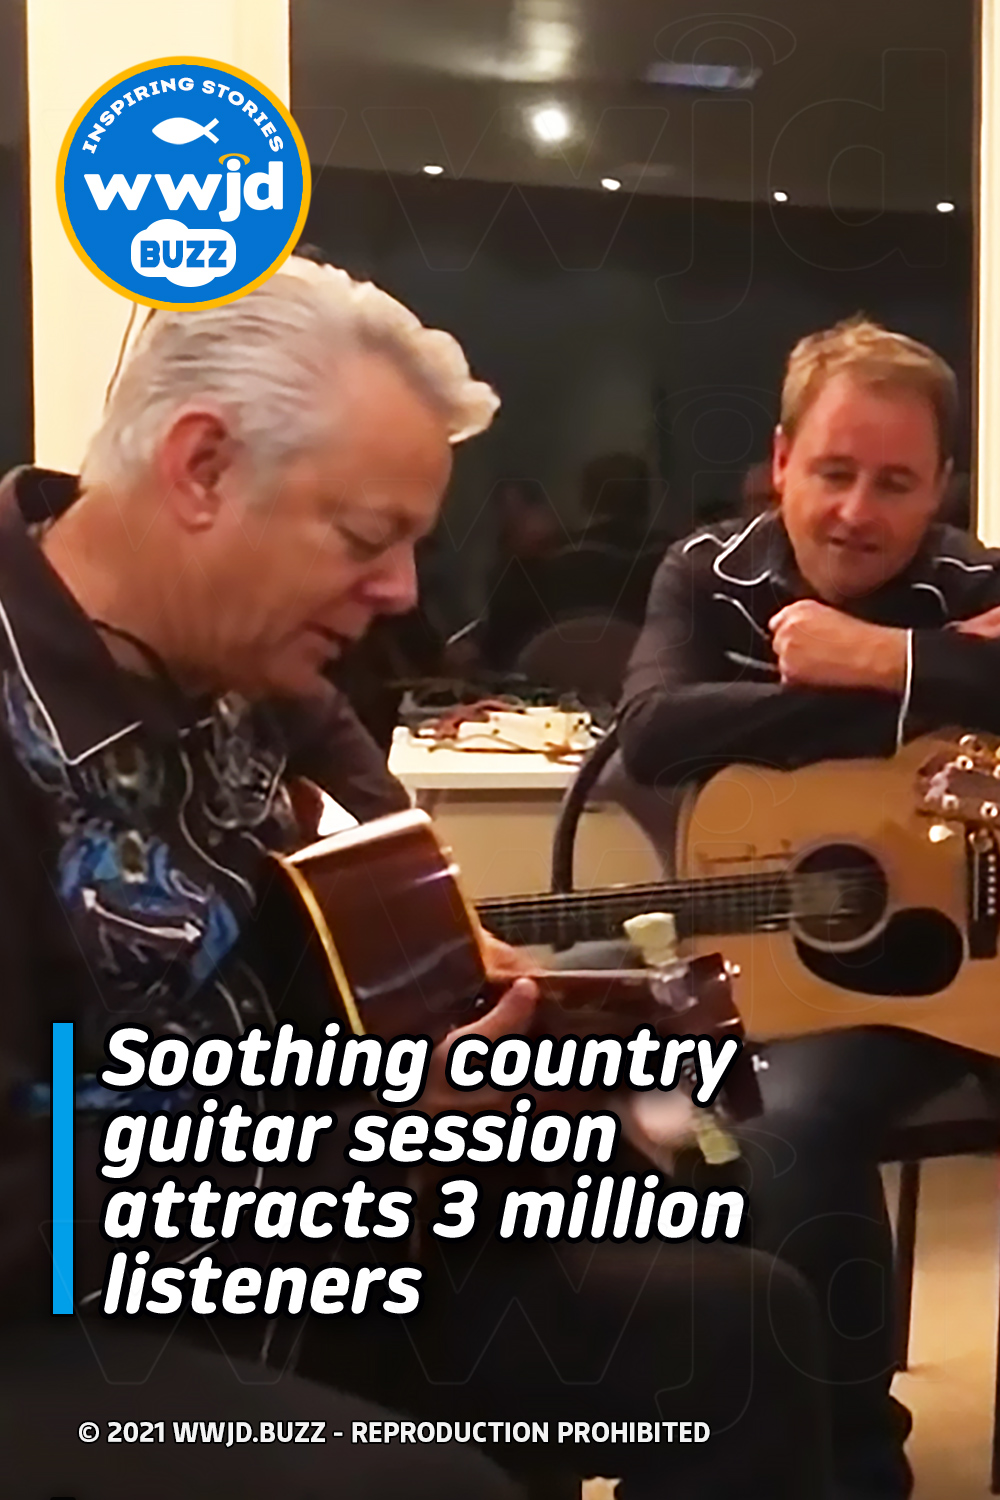 Soothing country guitar session attracts 3 million listeners